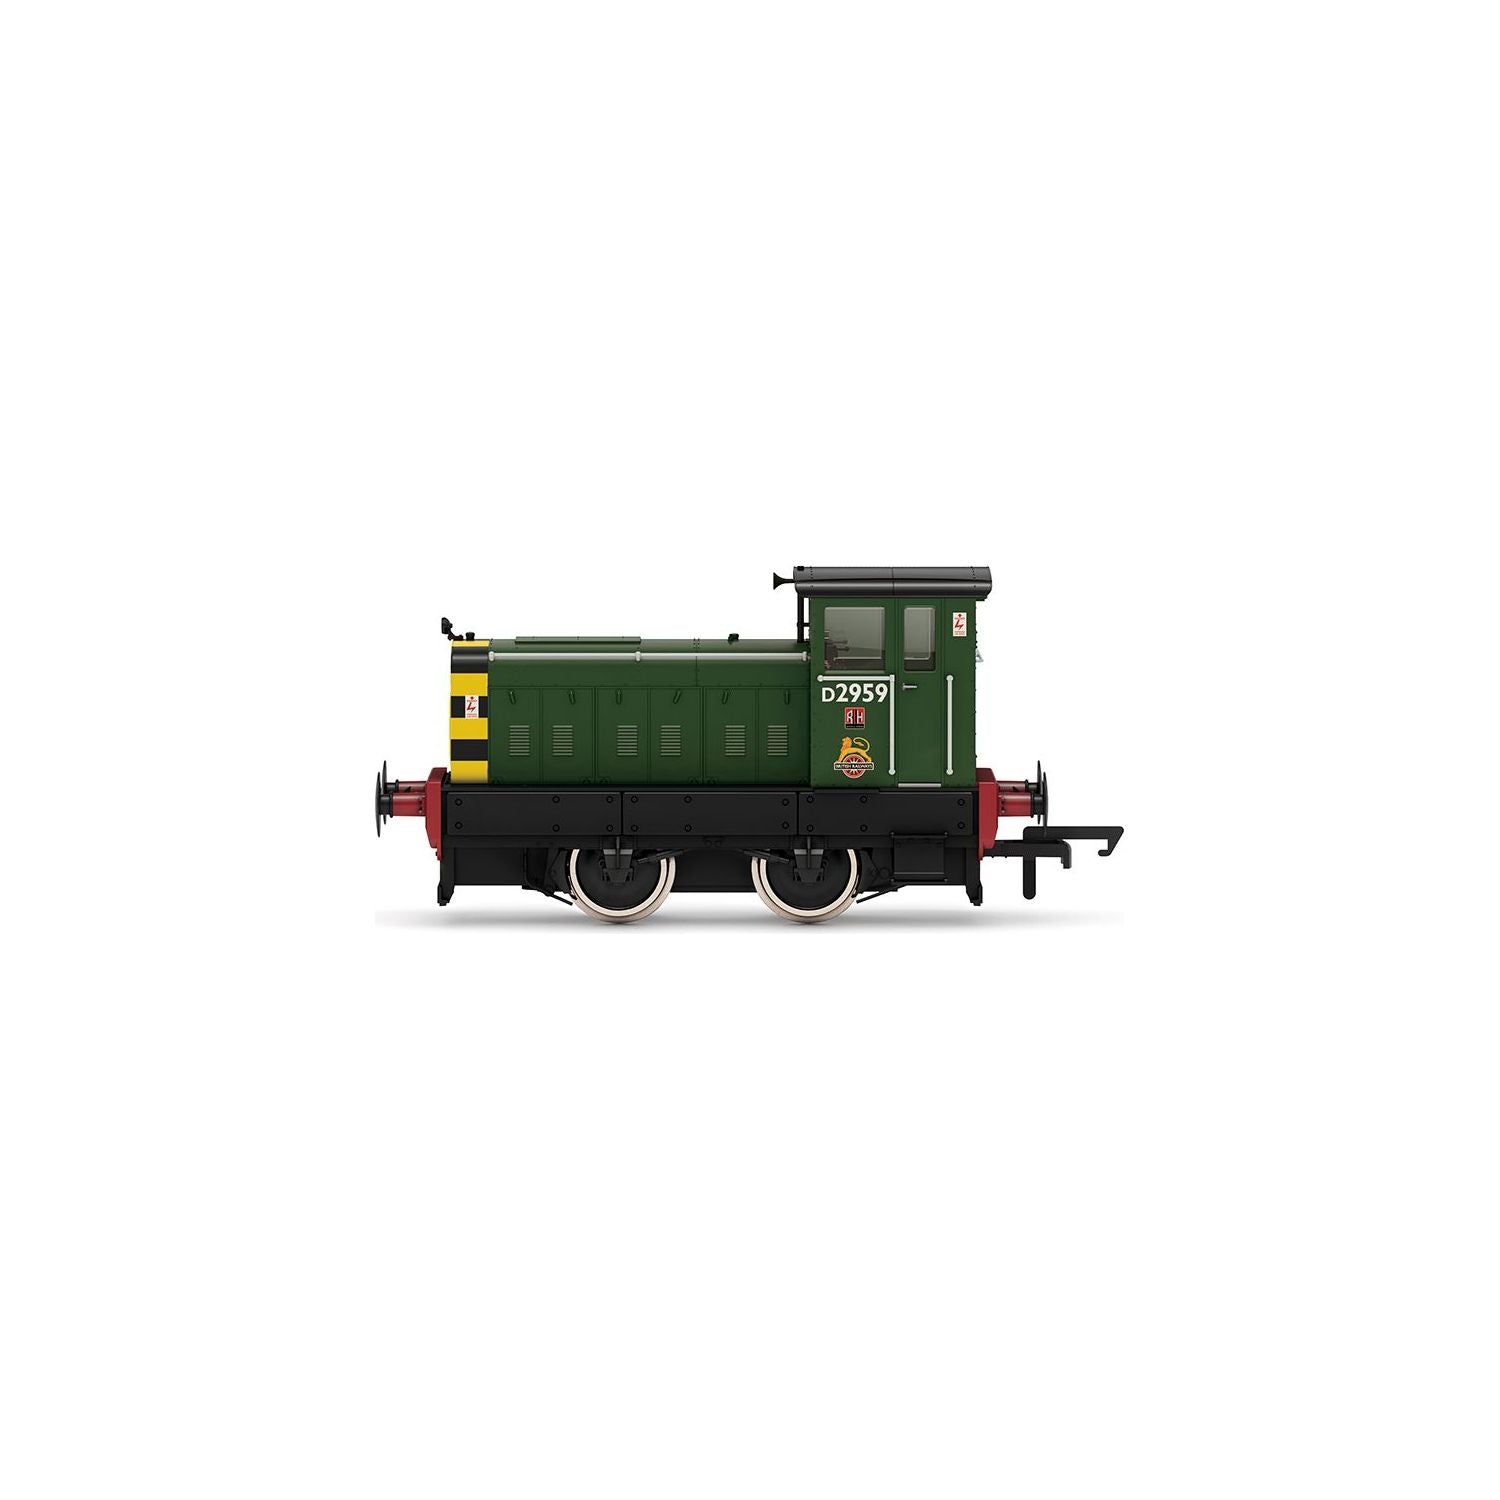 HORNBY BR, Ruston and Hornsby 88DS, 0-4-0, D2959 - Era 10